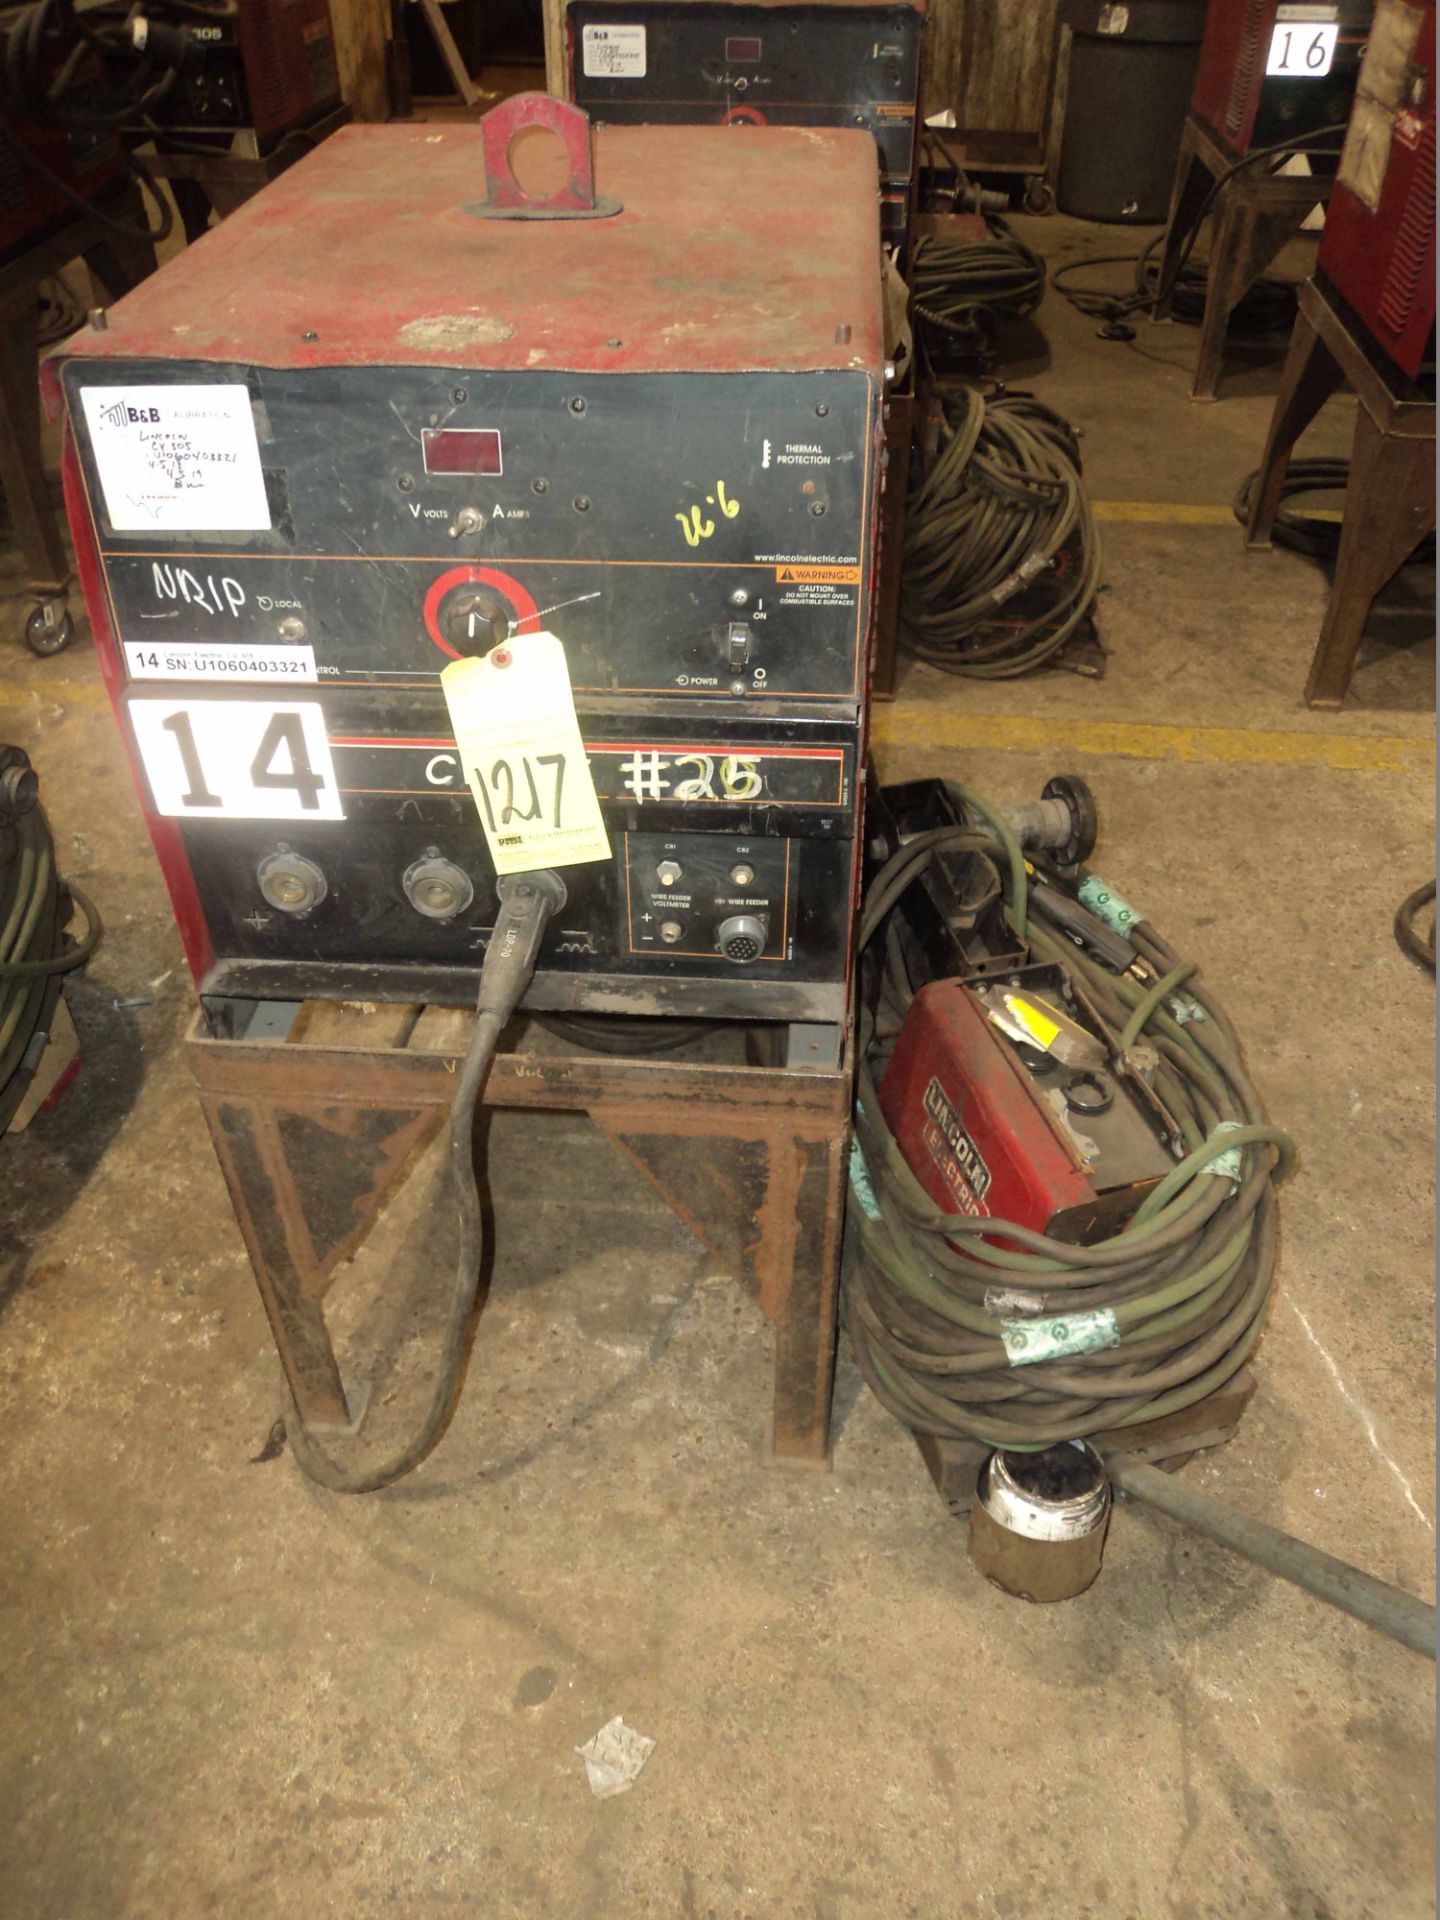 MIG WELDER, LINCOLN MDL. CV305, new 2006, 315 amps @ 32 v., 100% duty cycle, Lincoln Mdl.LF72 wire